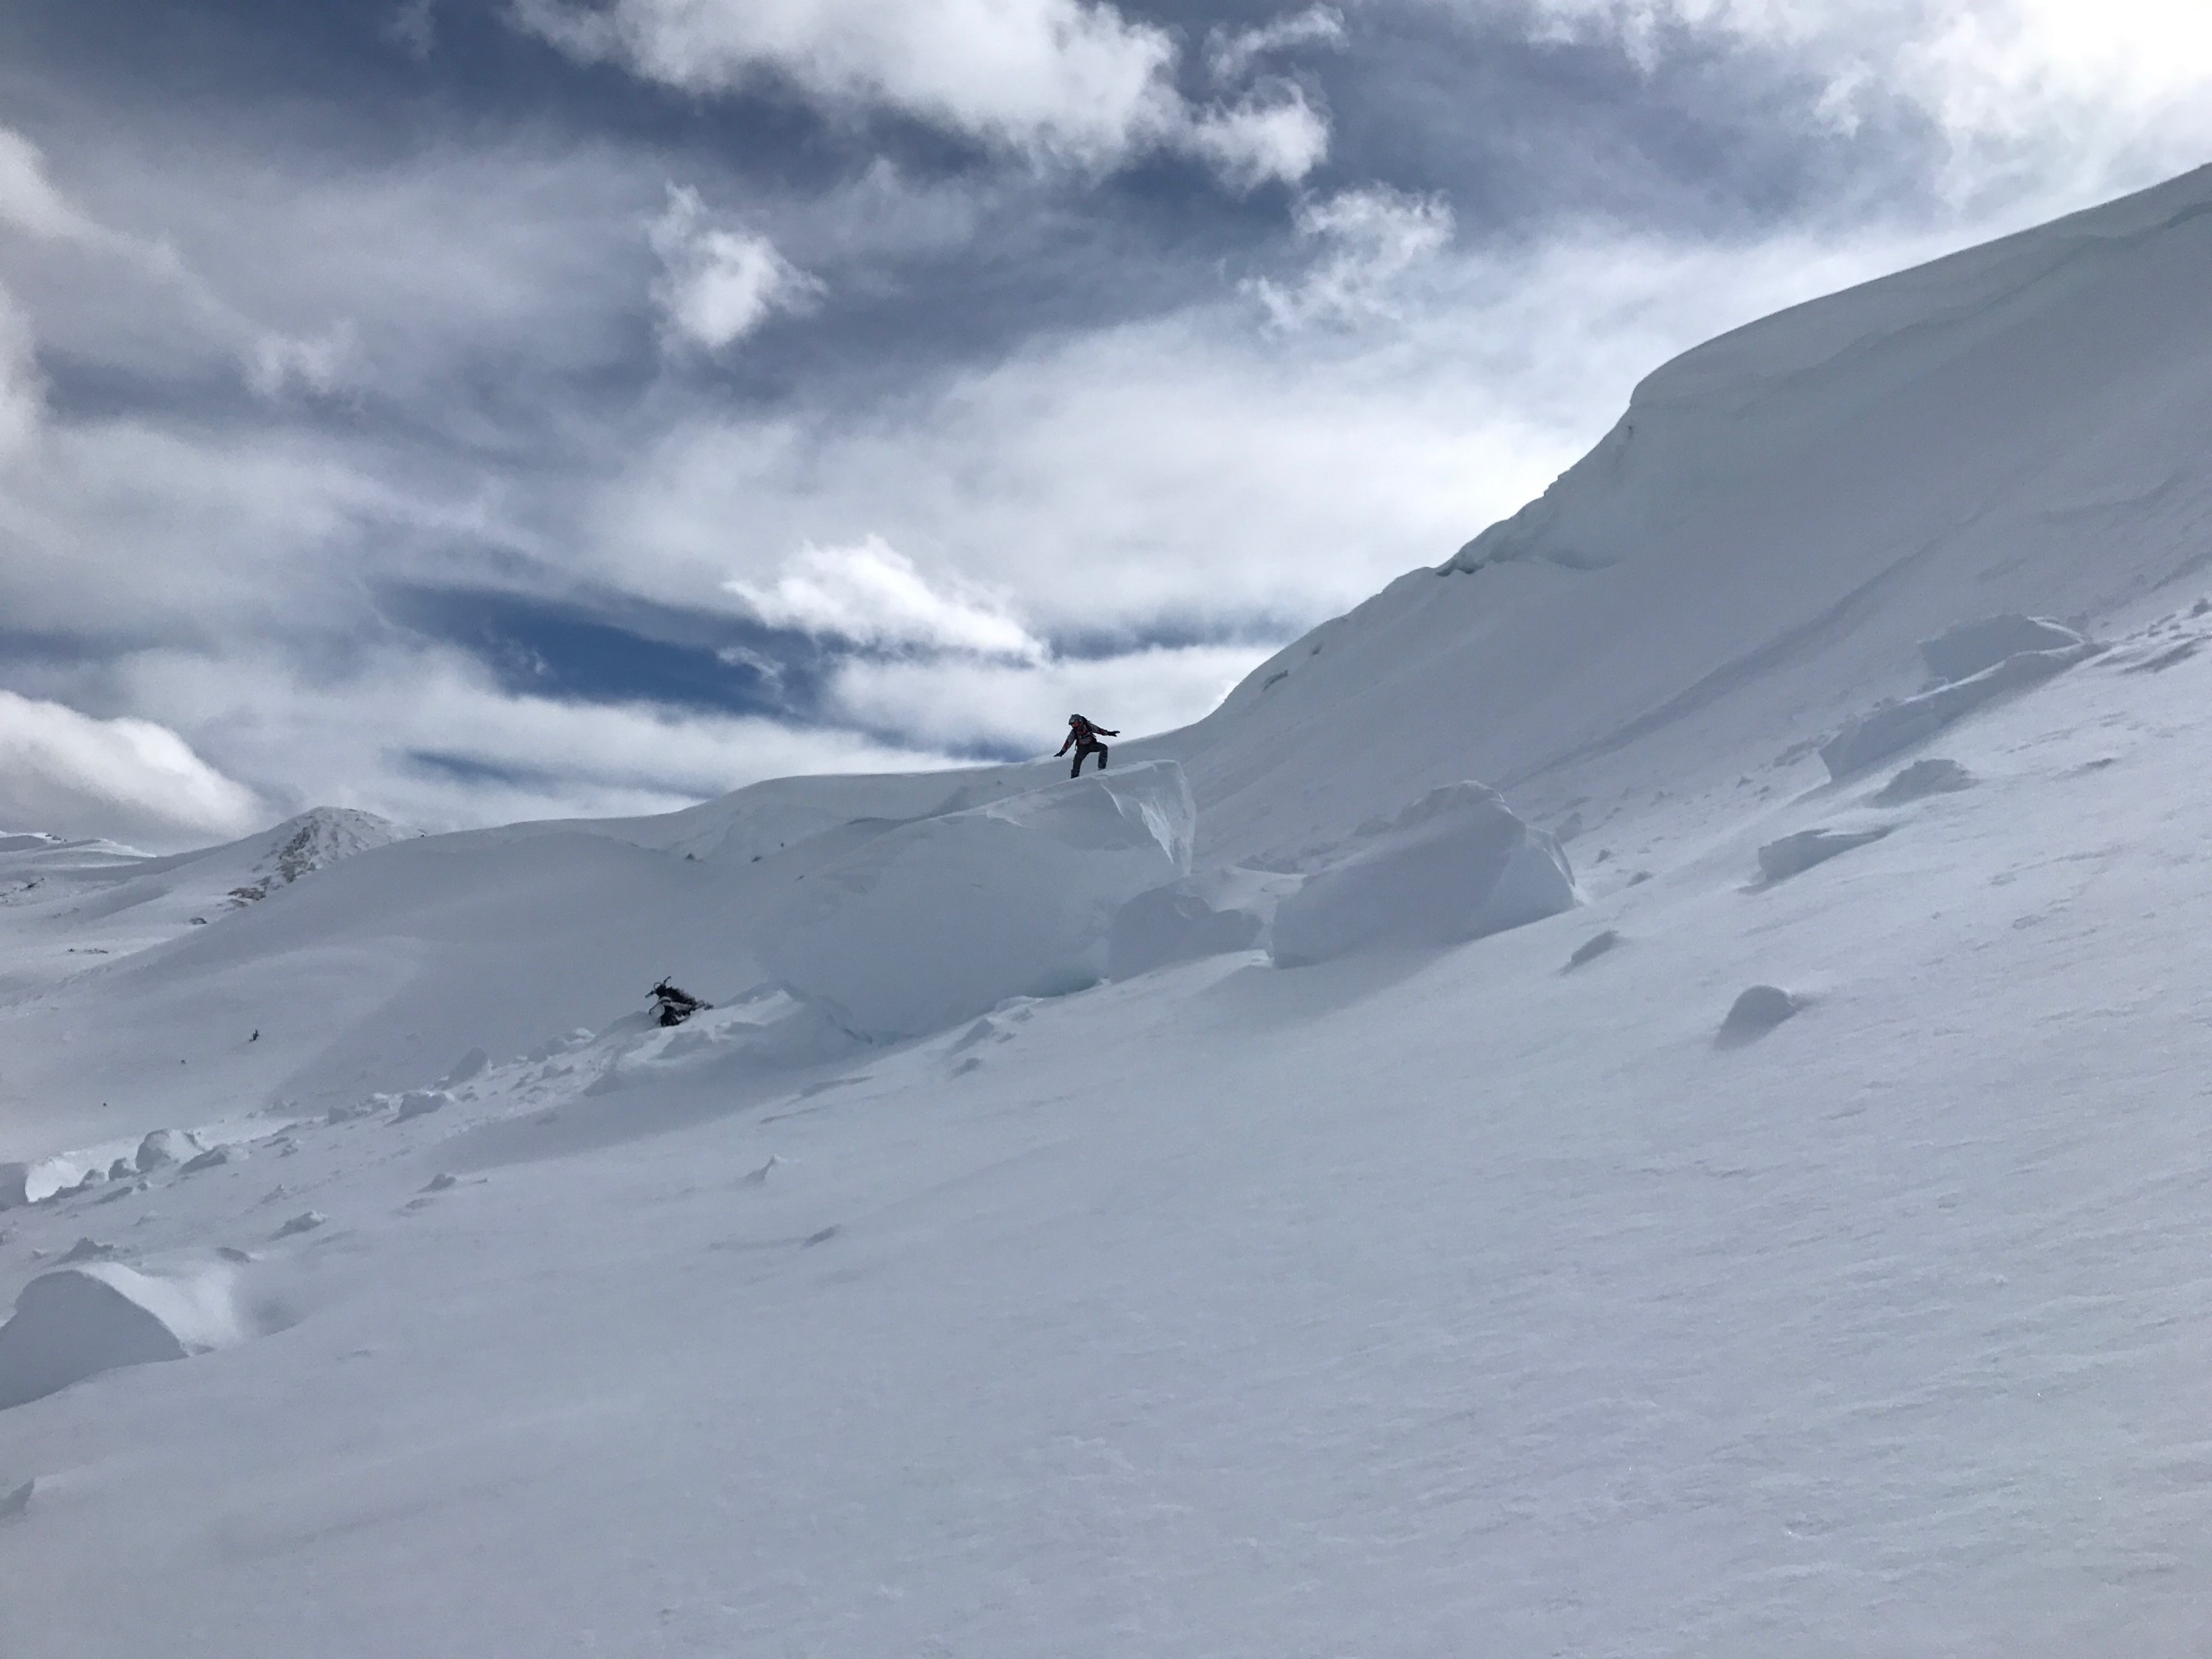 Surfing a large cornice